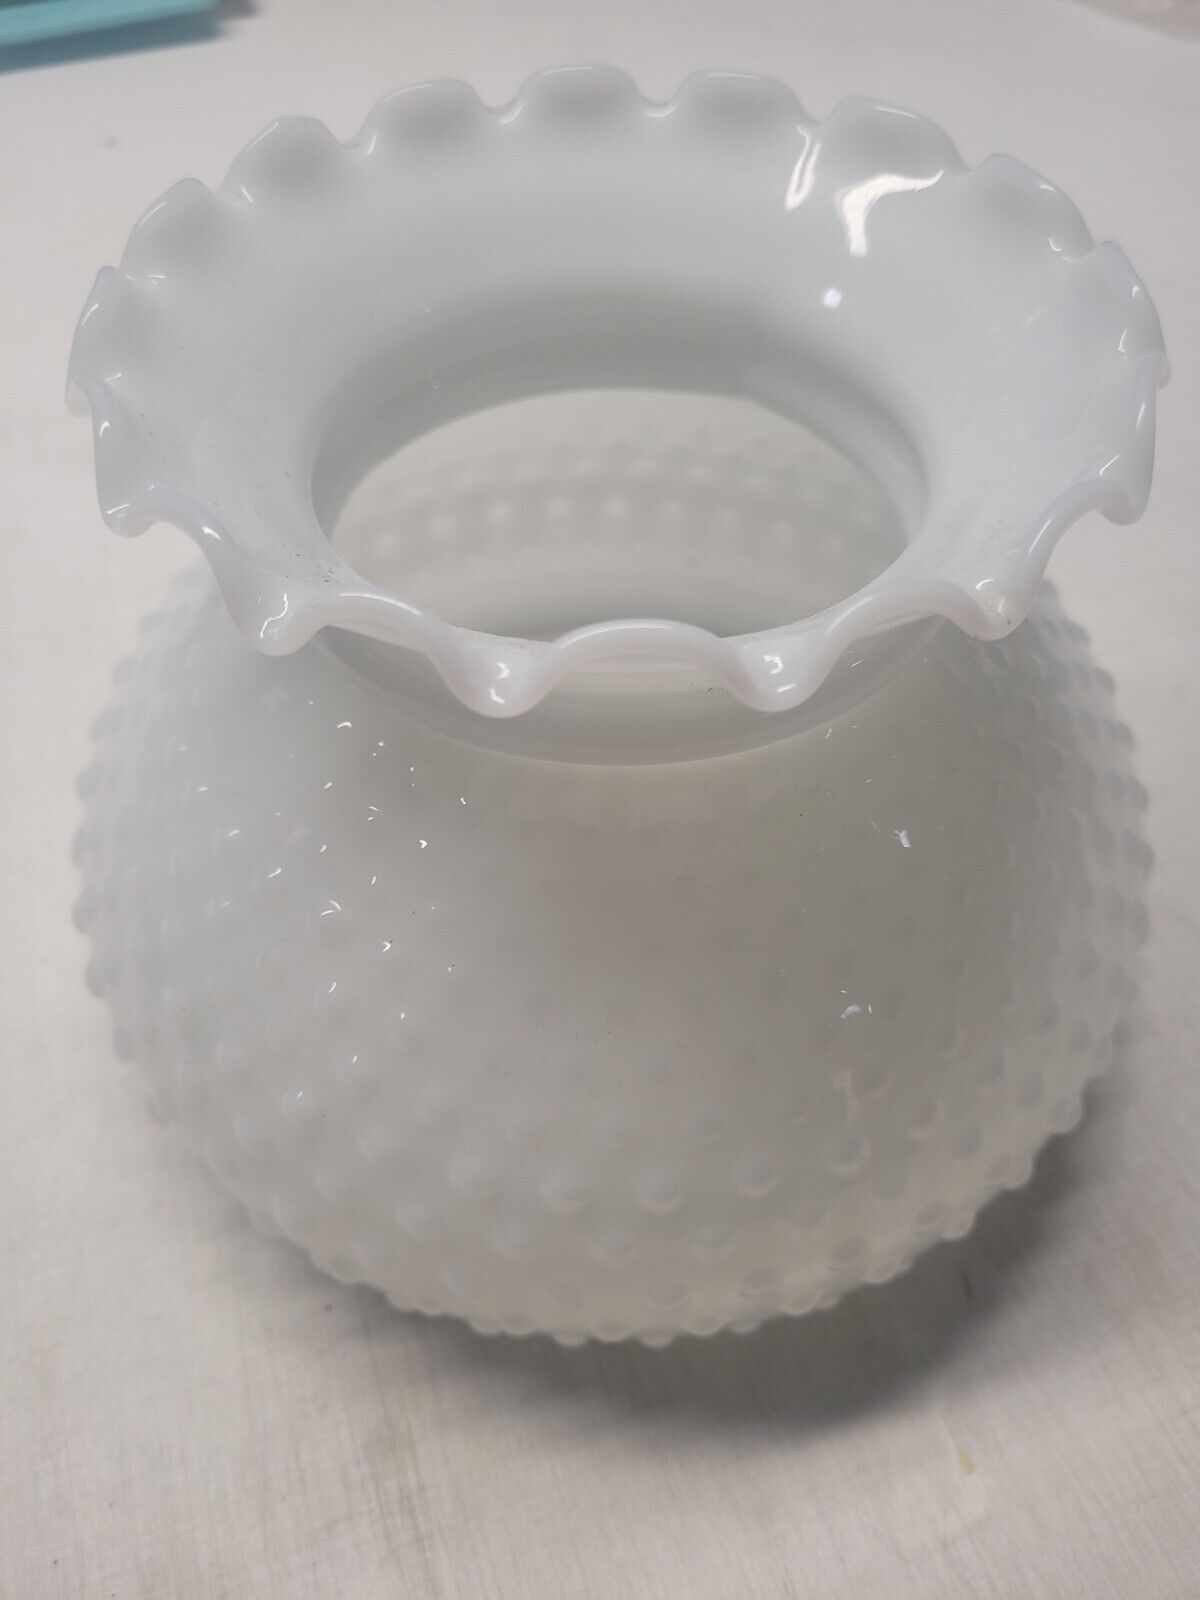 Fenton White Milk Glass Hobnail Ruffled Lamp Shade Excellent Condition